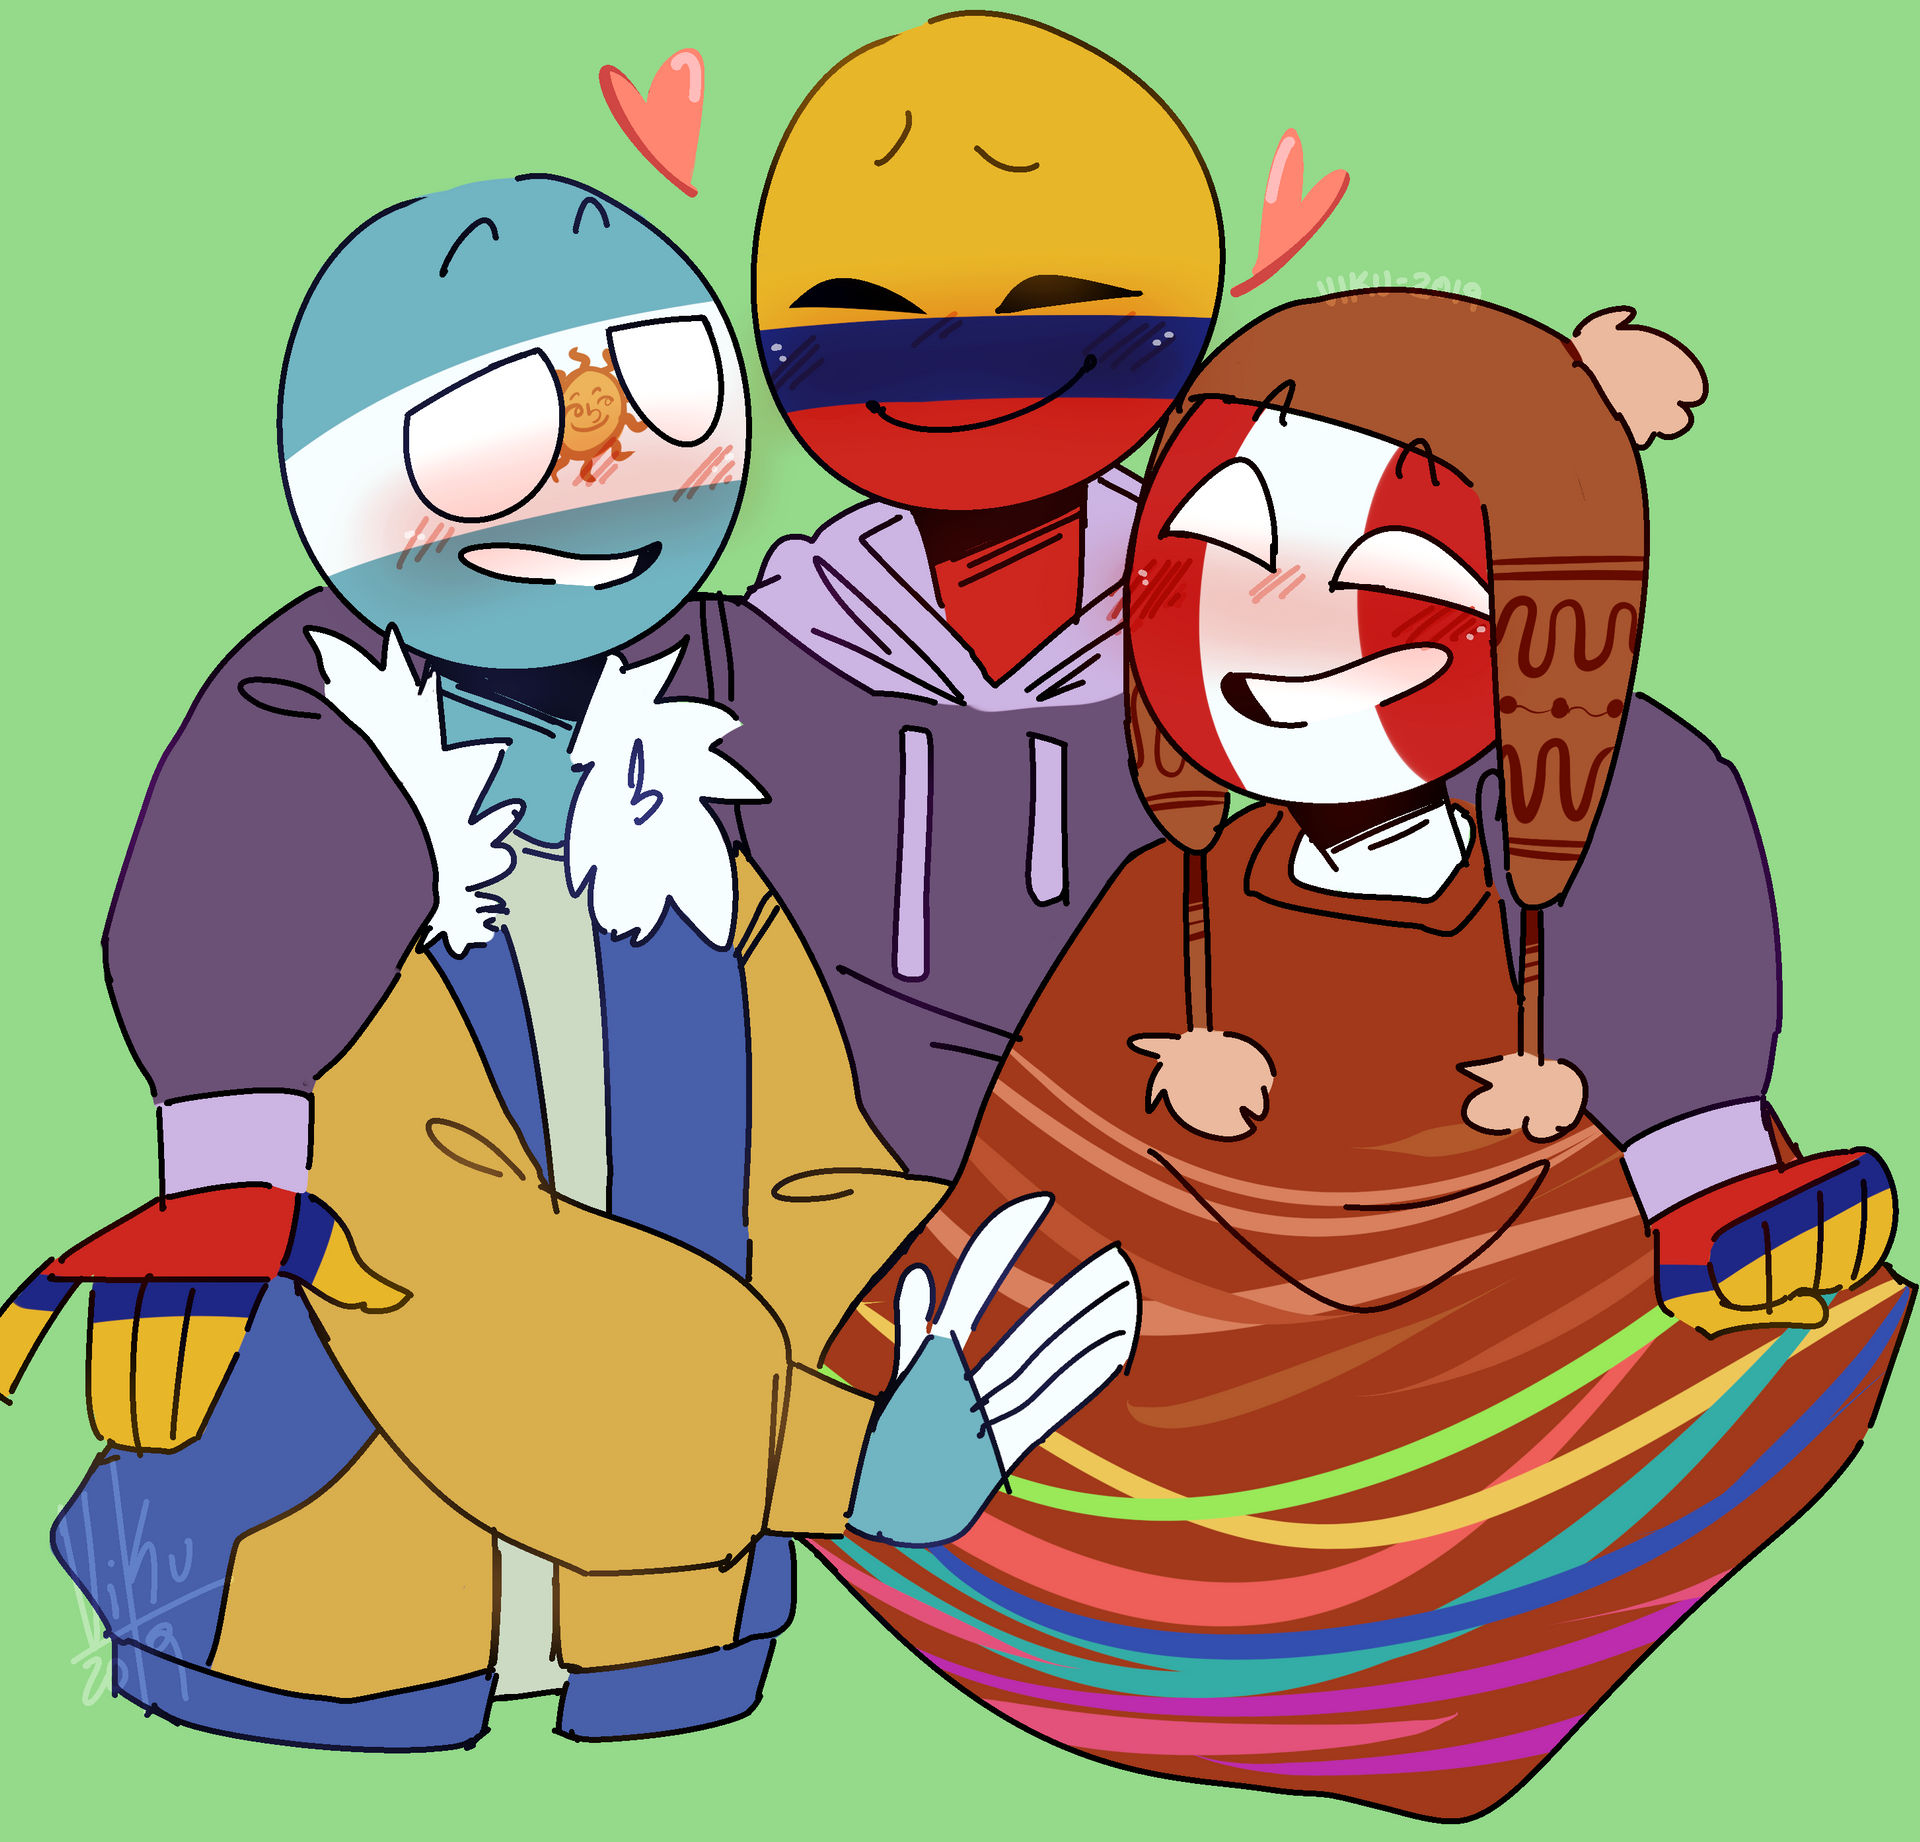 Countryhumans Argentina, Peru and Colombia by vikitoria150 on